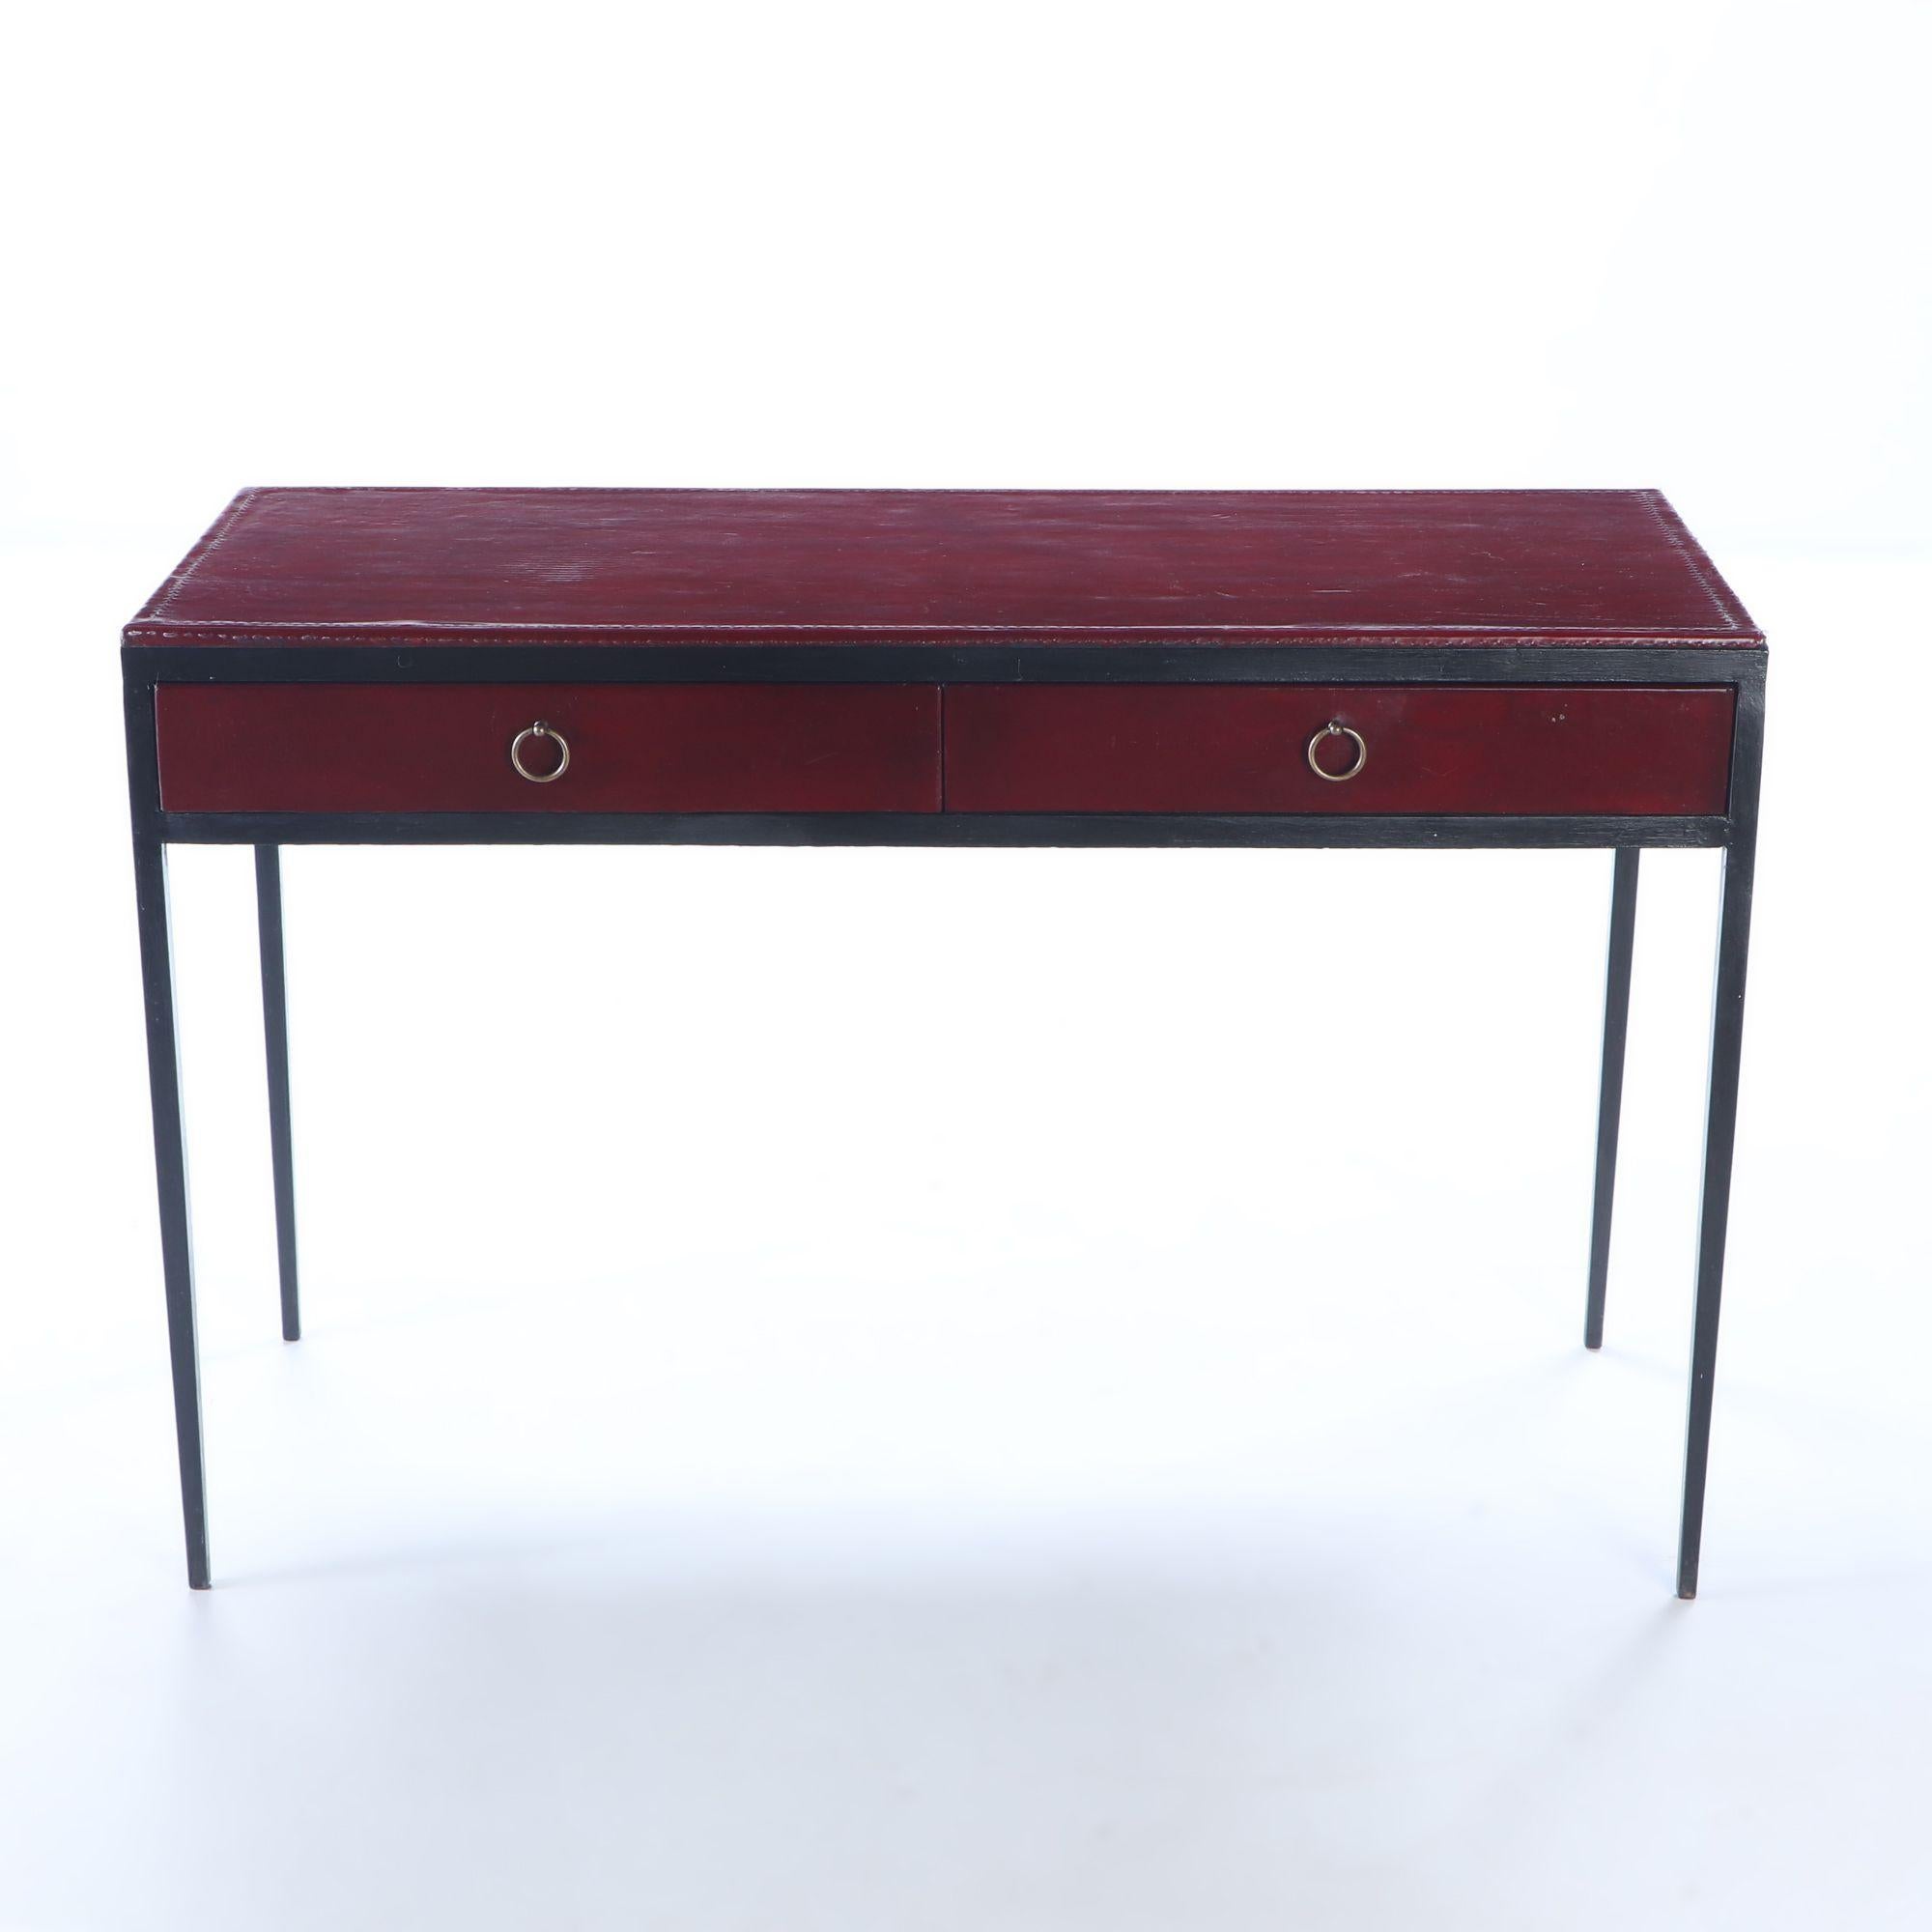 Iron and red leather writing desk having two drawers in the manner of Jean-Michel Frank. Custom orders possible.